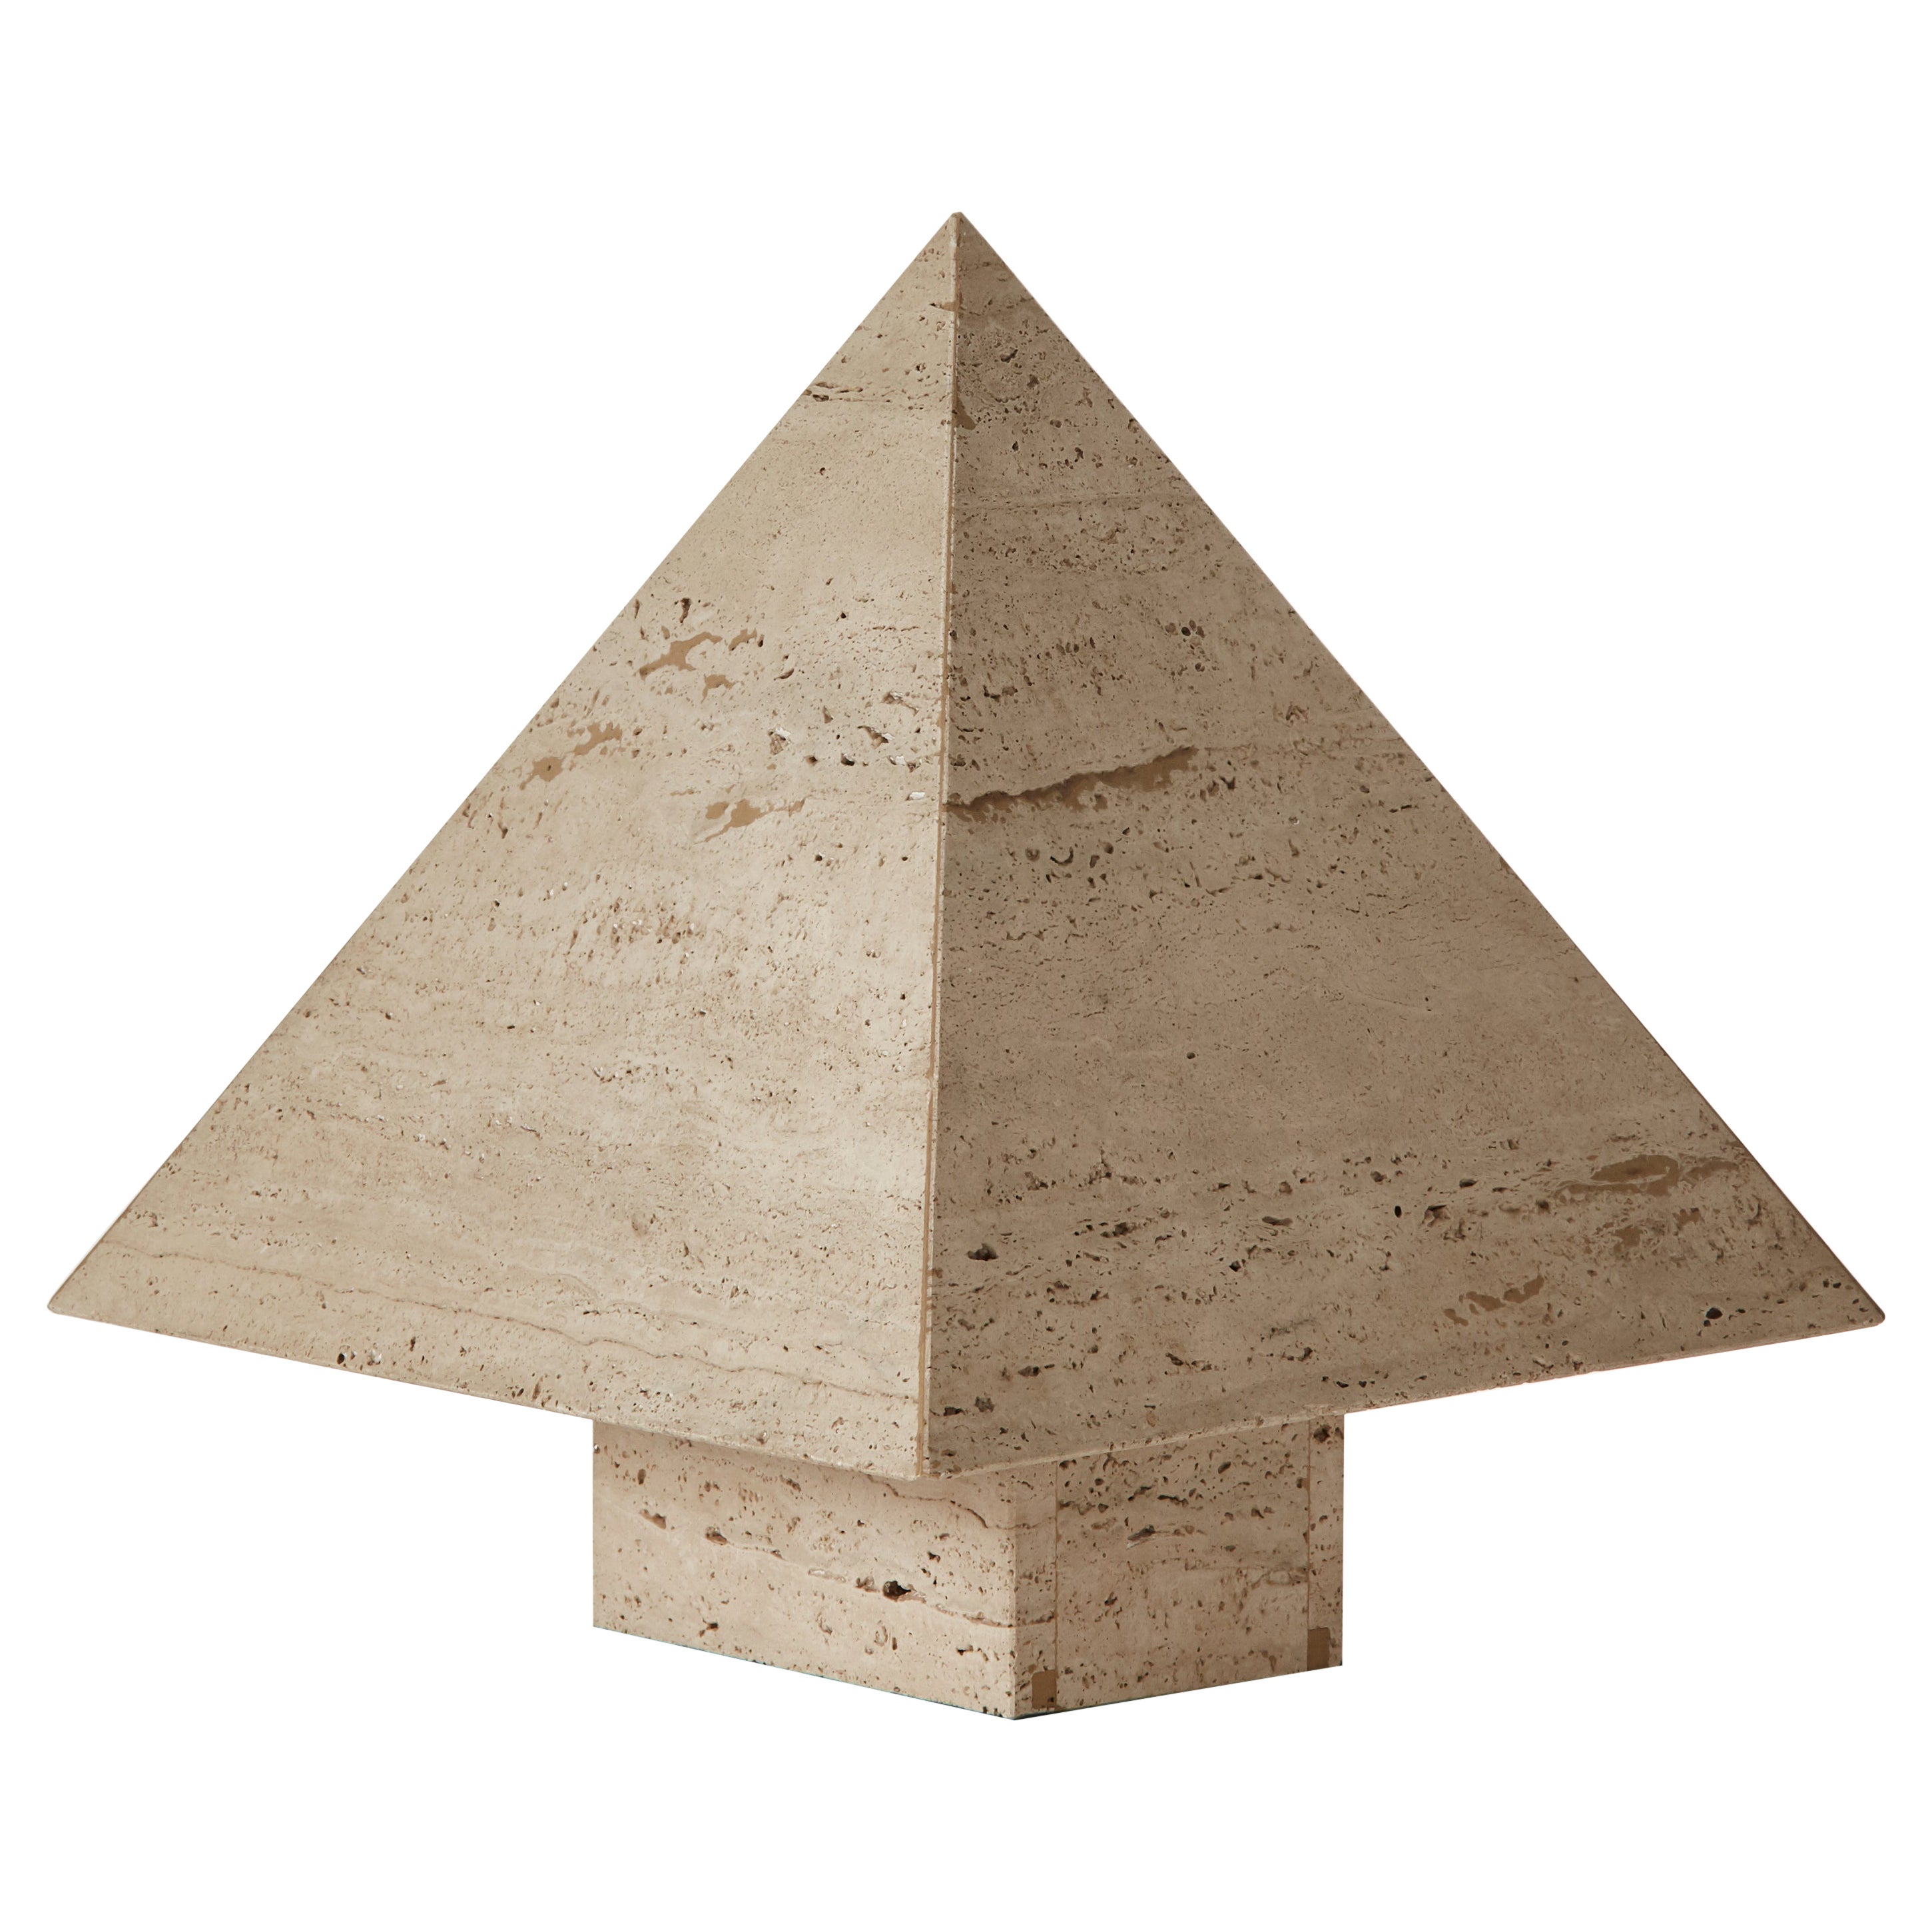 1970s Vintage Travertine Table Lamp in Pyramid Form